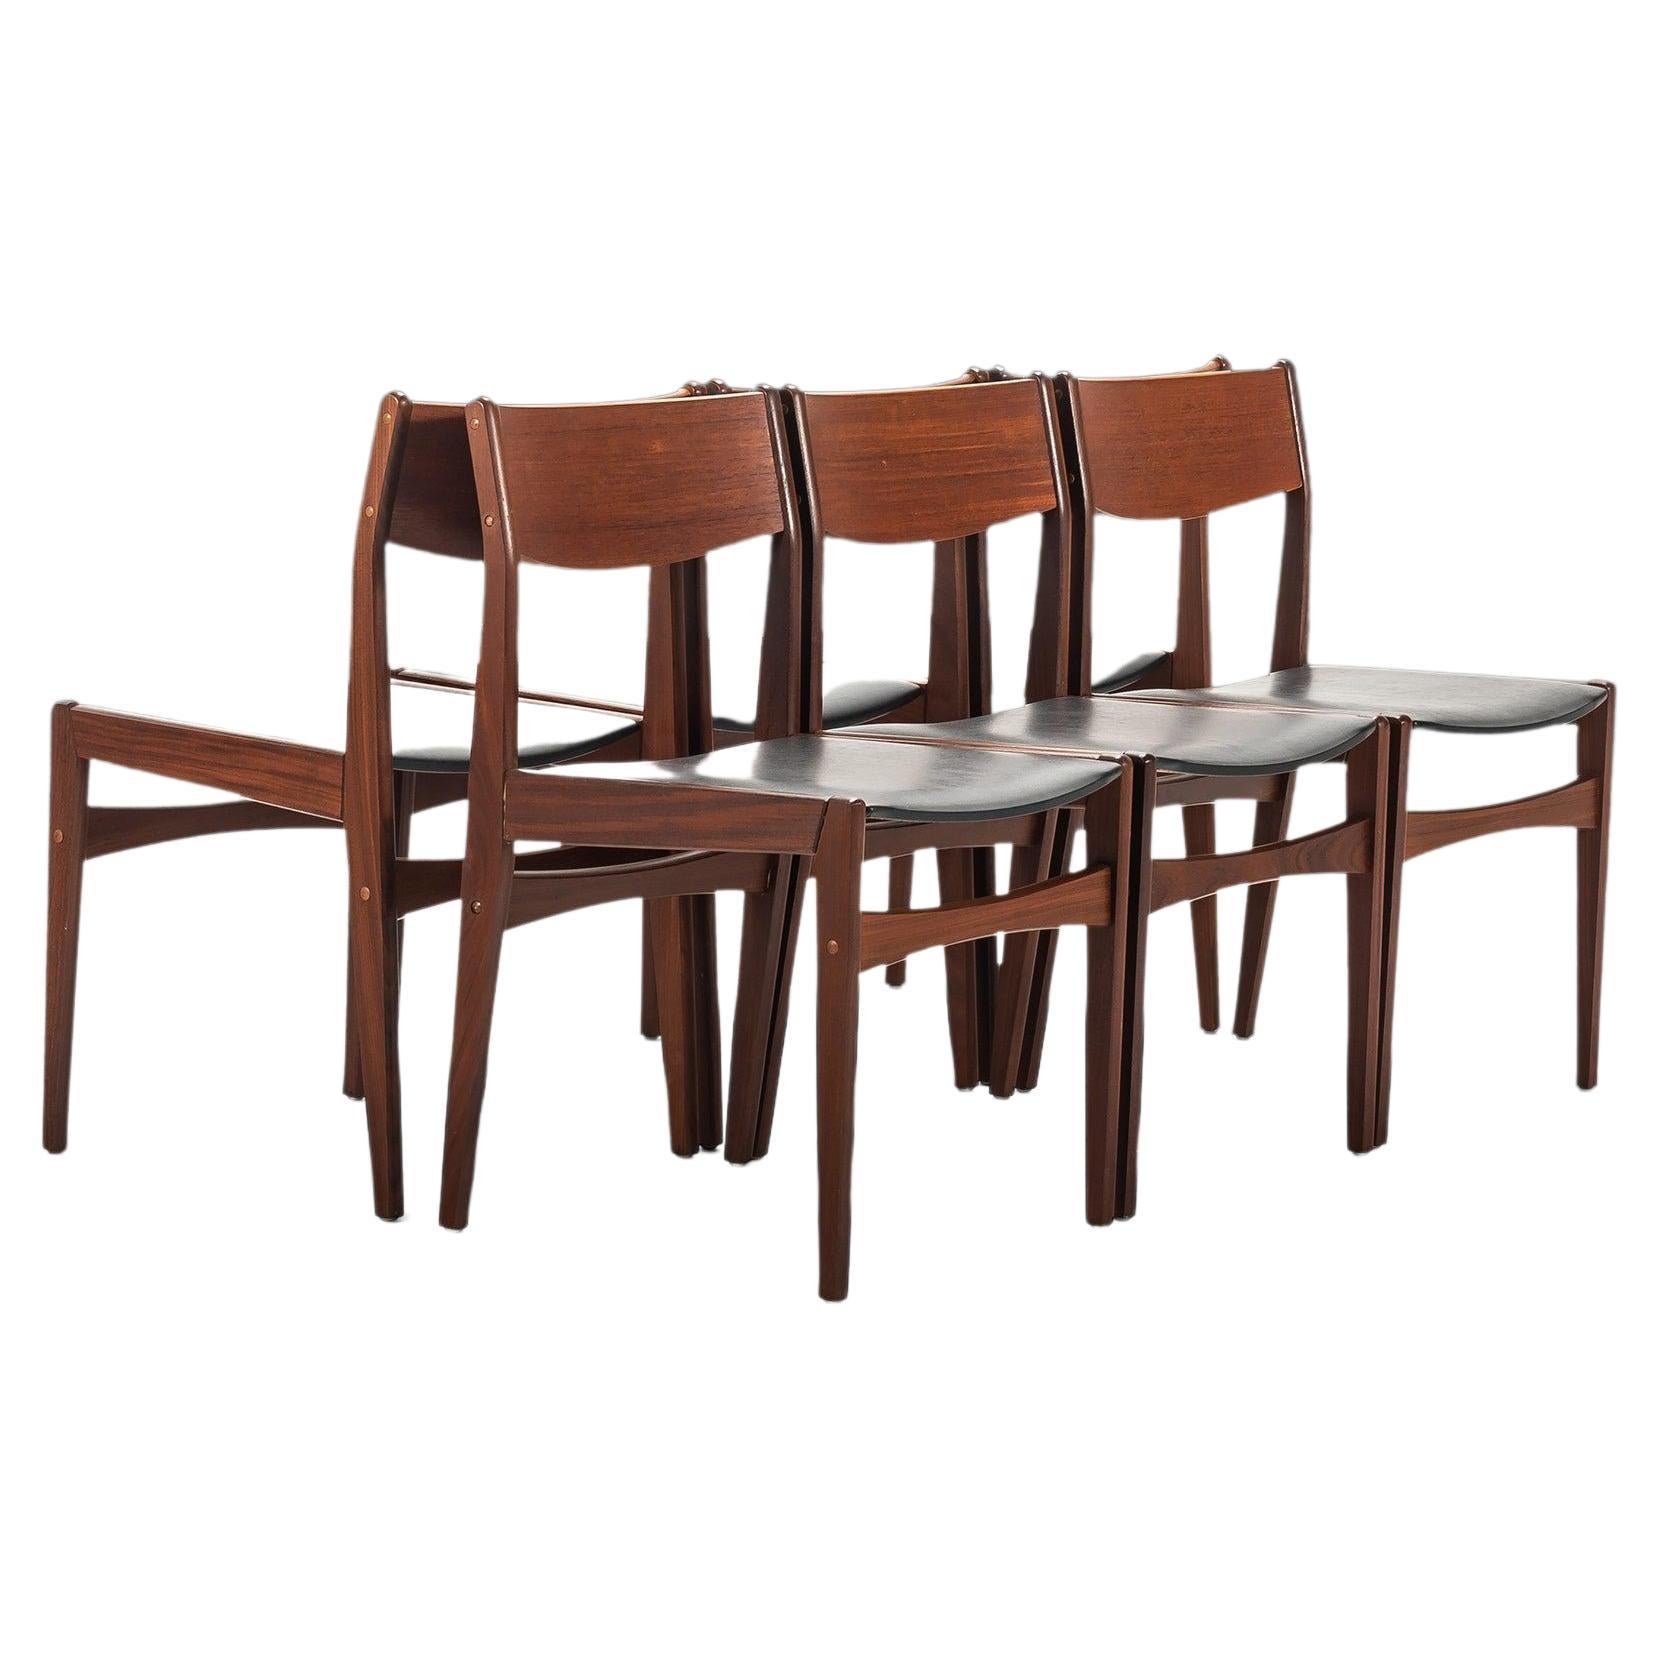 Set of Six '6' Teak Dining Chairs Poul Volther for Frem Røjle, Denmark, c. 1960s